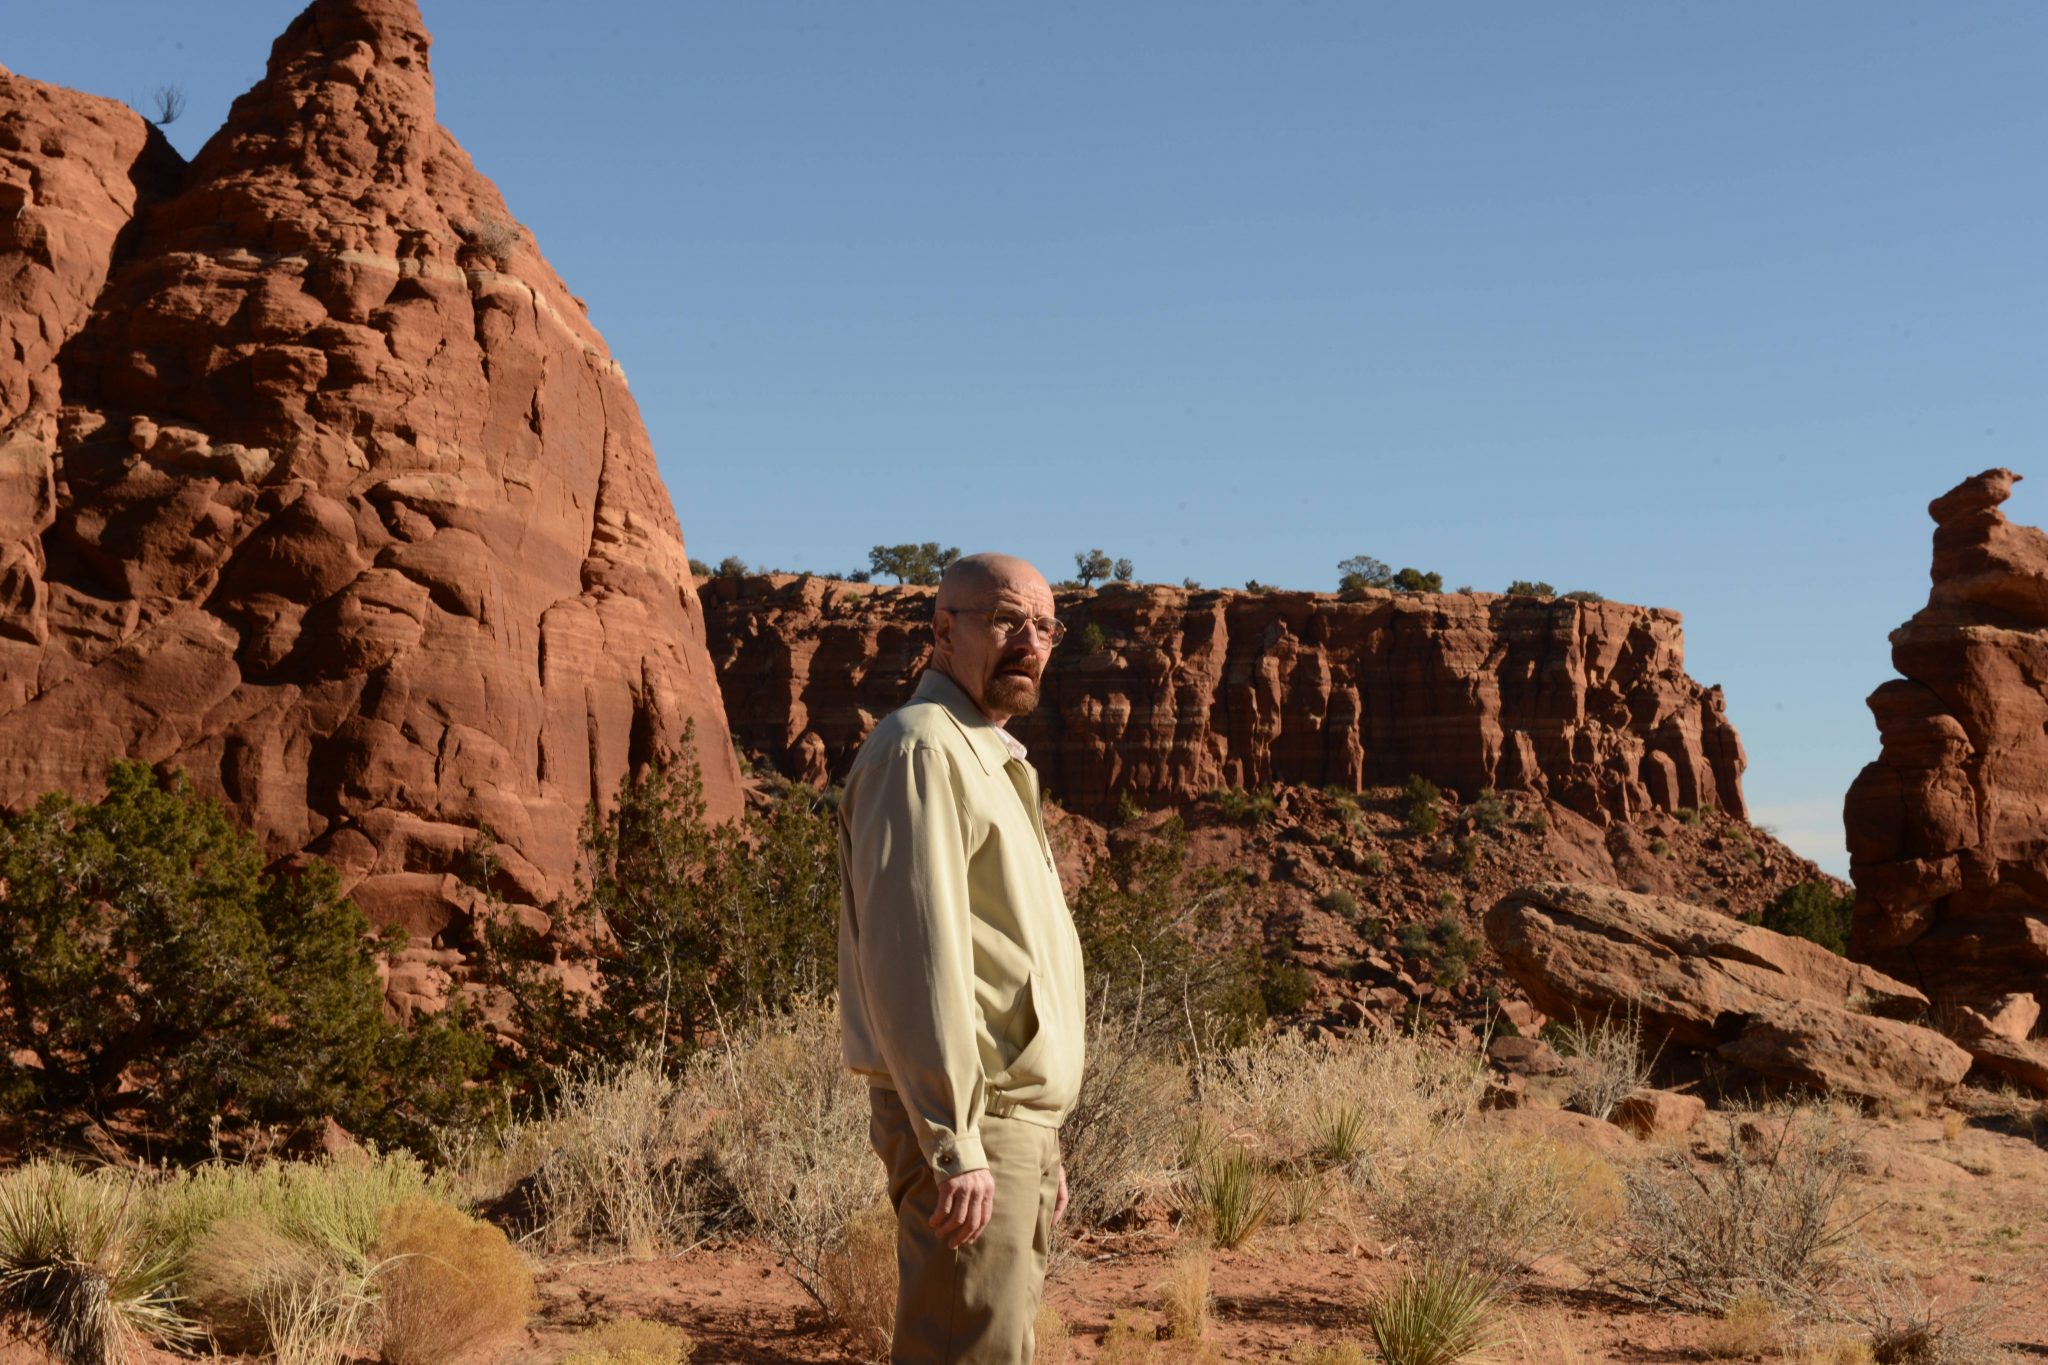 Bryan Cranston as Walter White  stands in a beige jacket and pants in the desert.